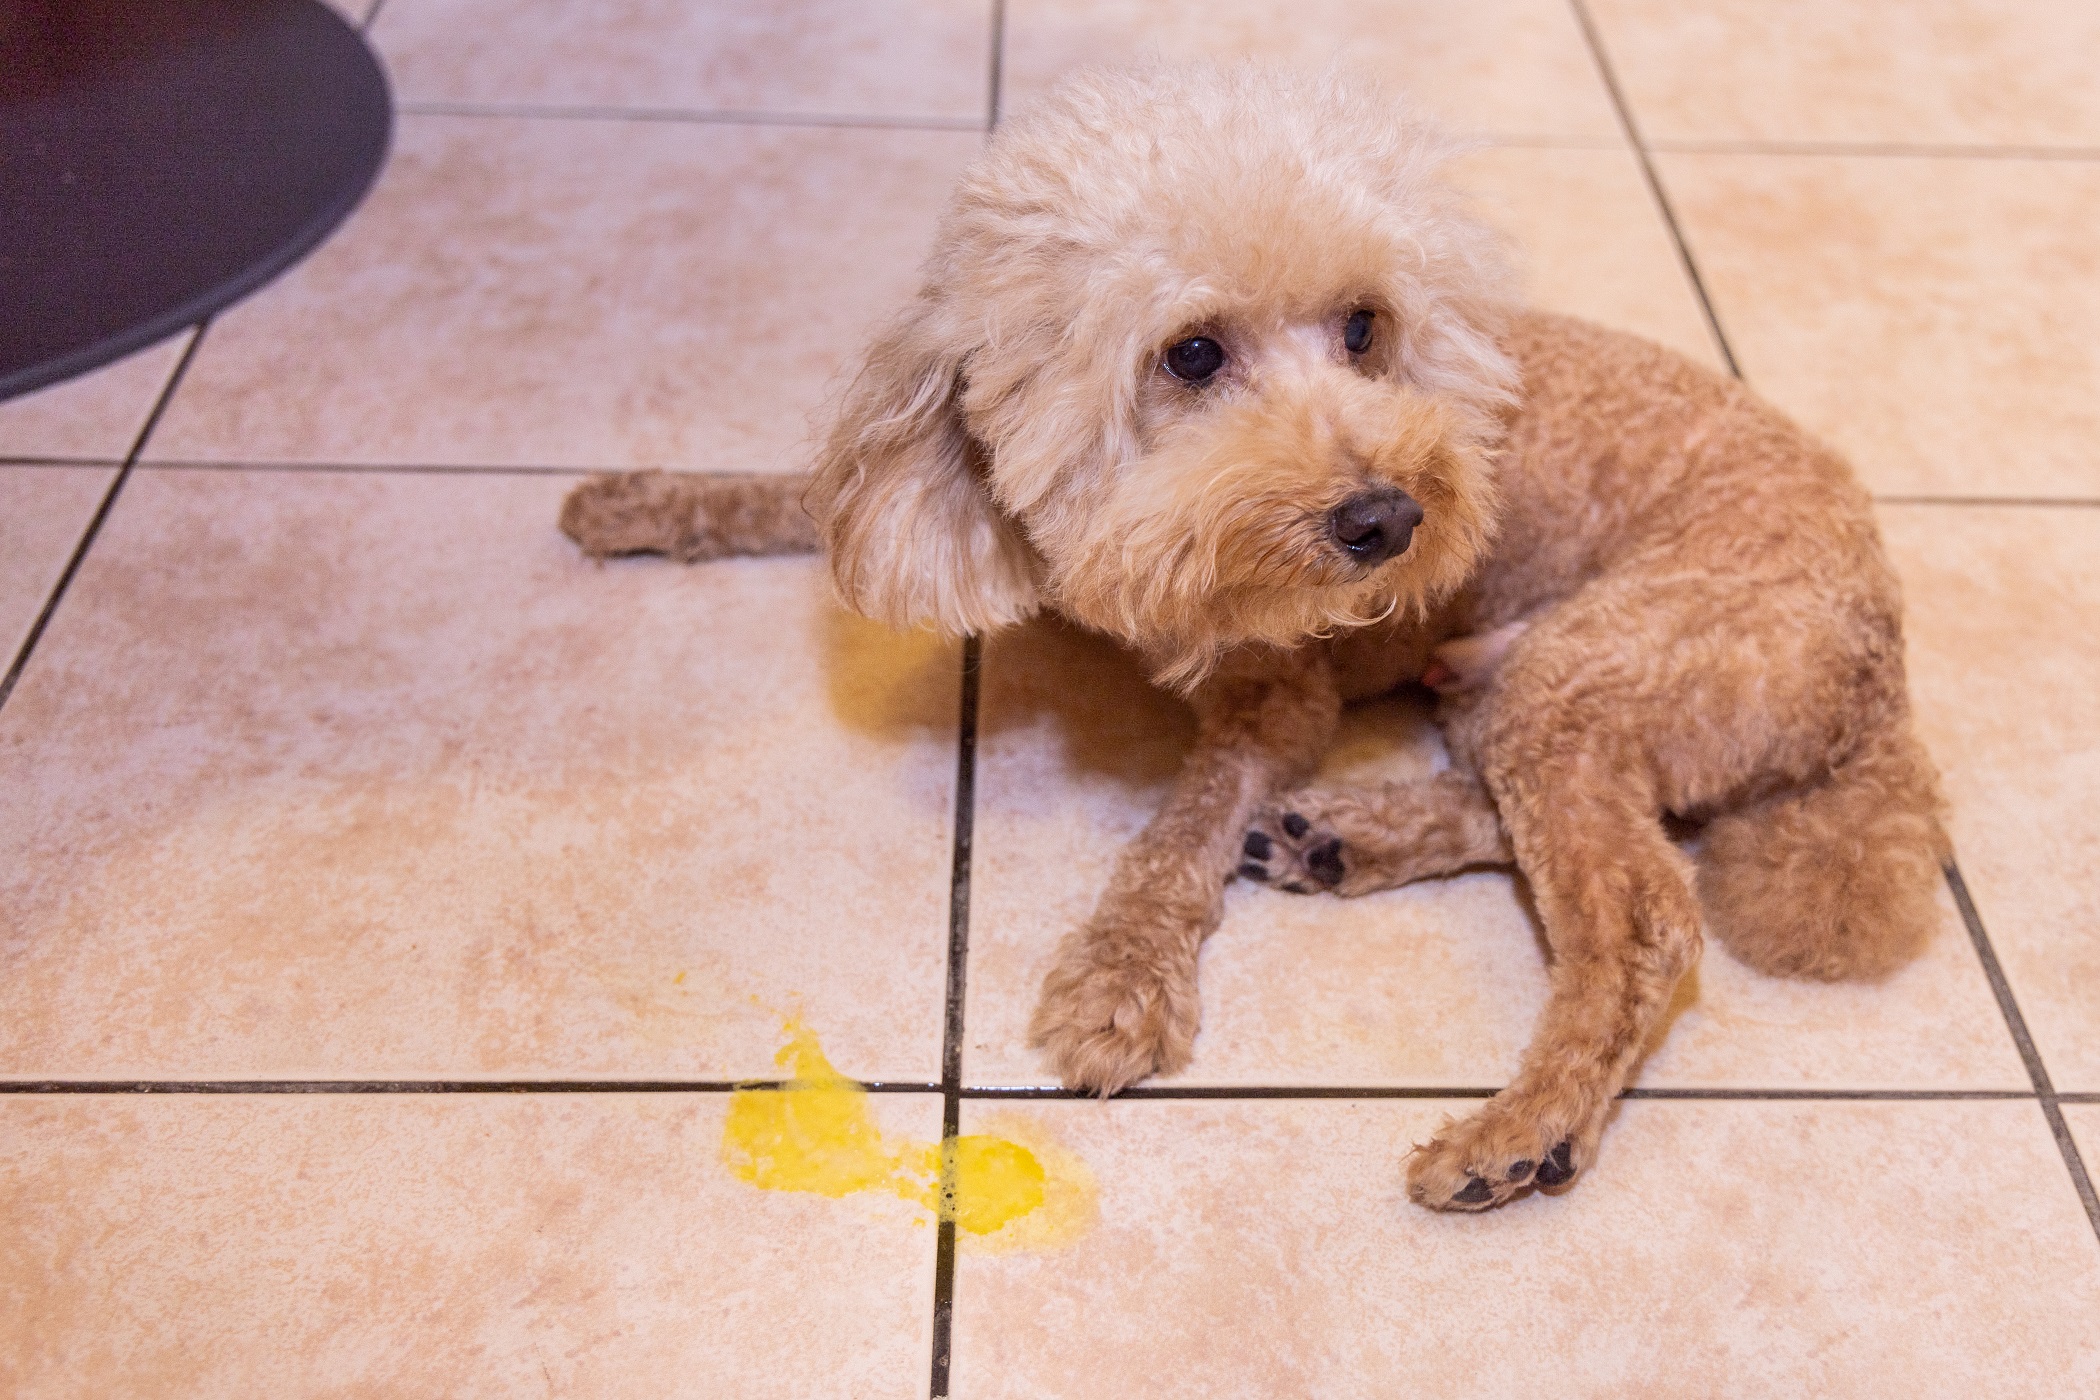 Dog with puddle of yellow vomit